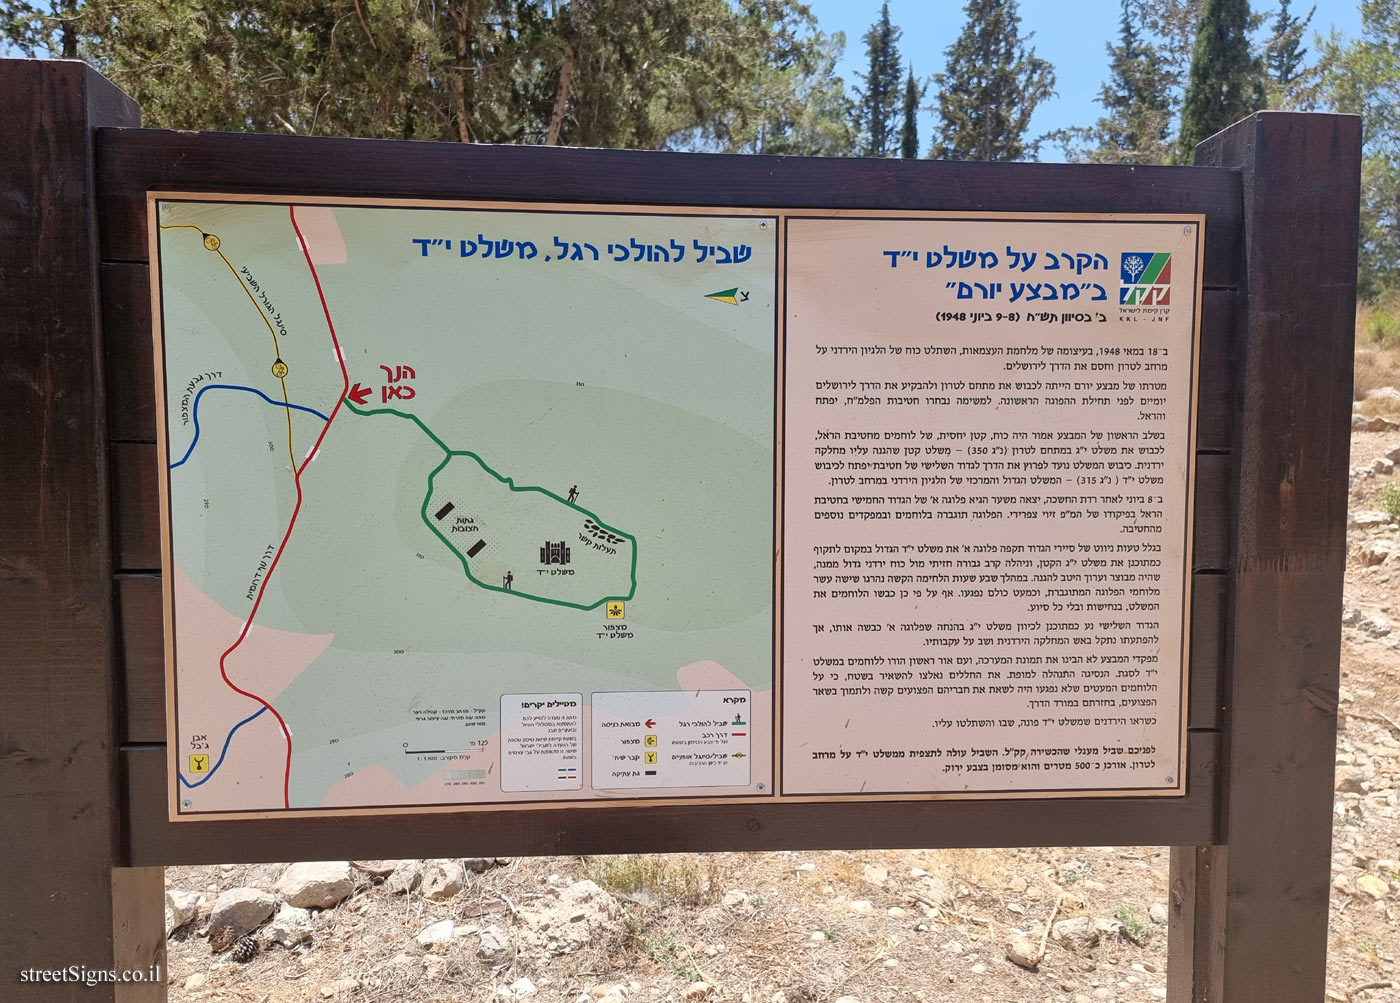 Latrun - The Battle of post 14 in "Operation Yoram"